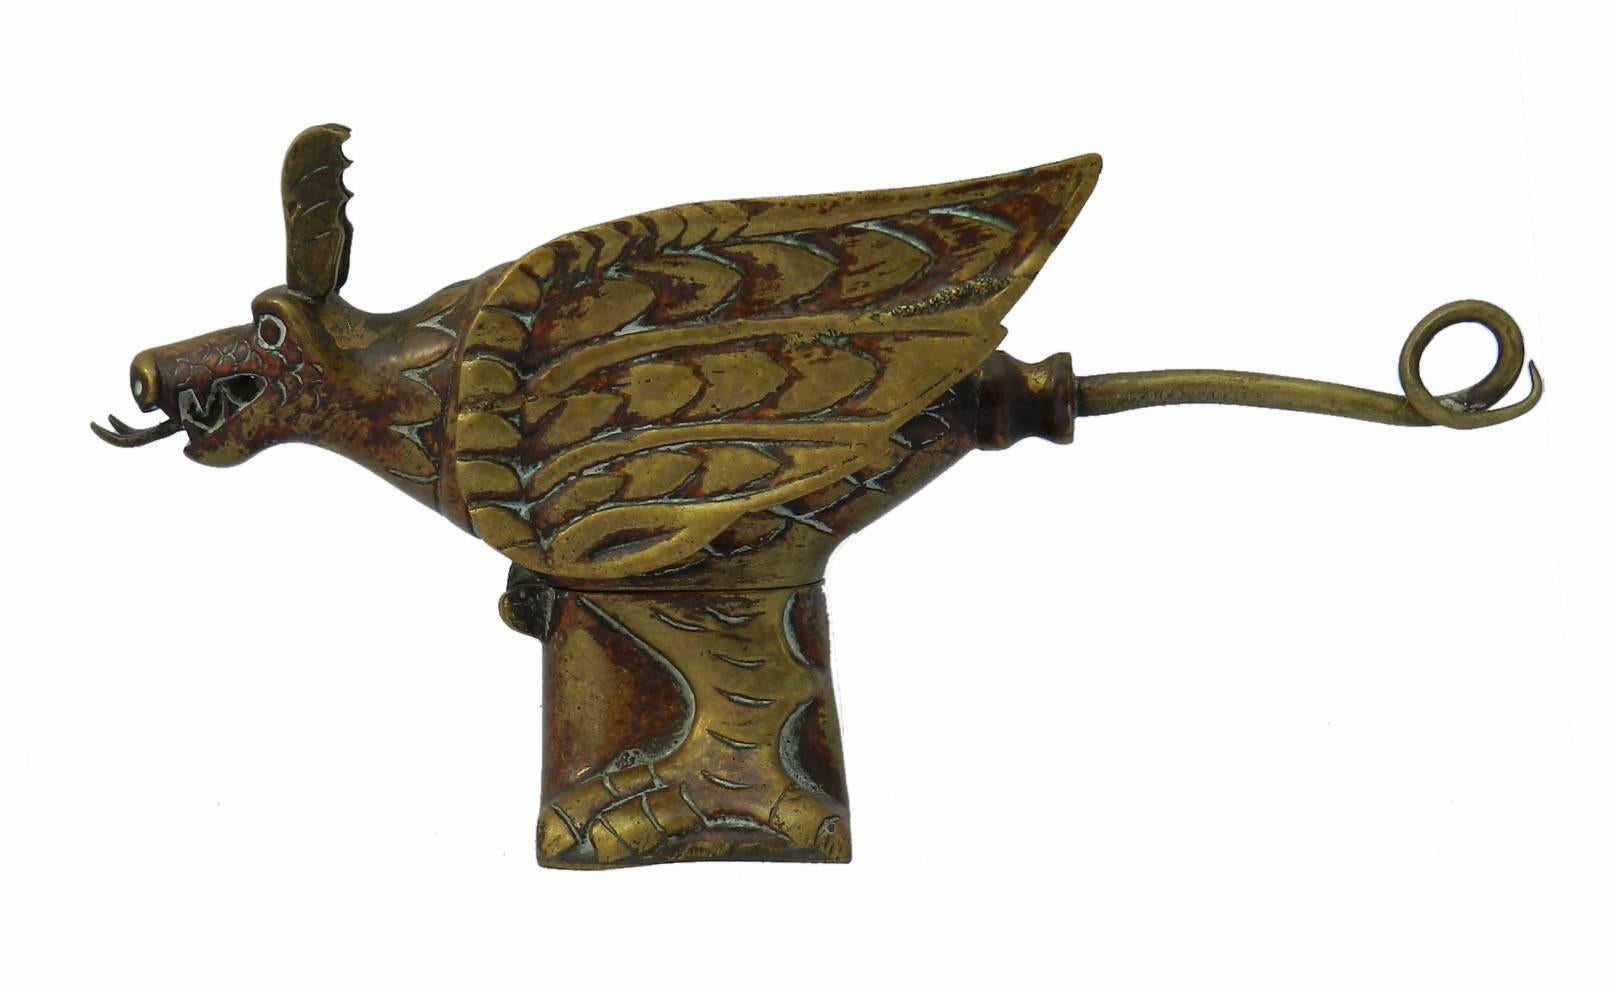 Brass inkwell curious dragon, bird late 19th century early 20th century
Unusual fantasy creature novelty inkwell
No liner
Good antique condition with signs of age and remnants of years of cleaning


 